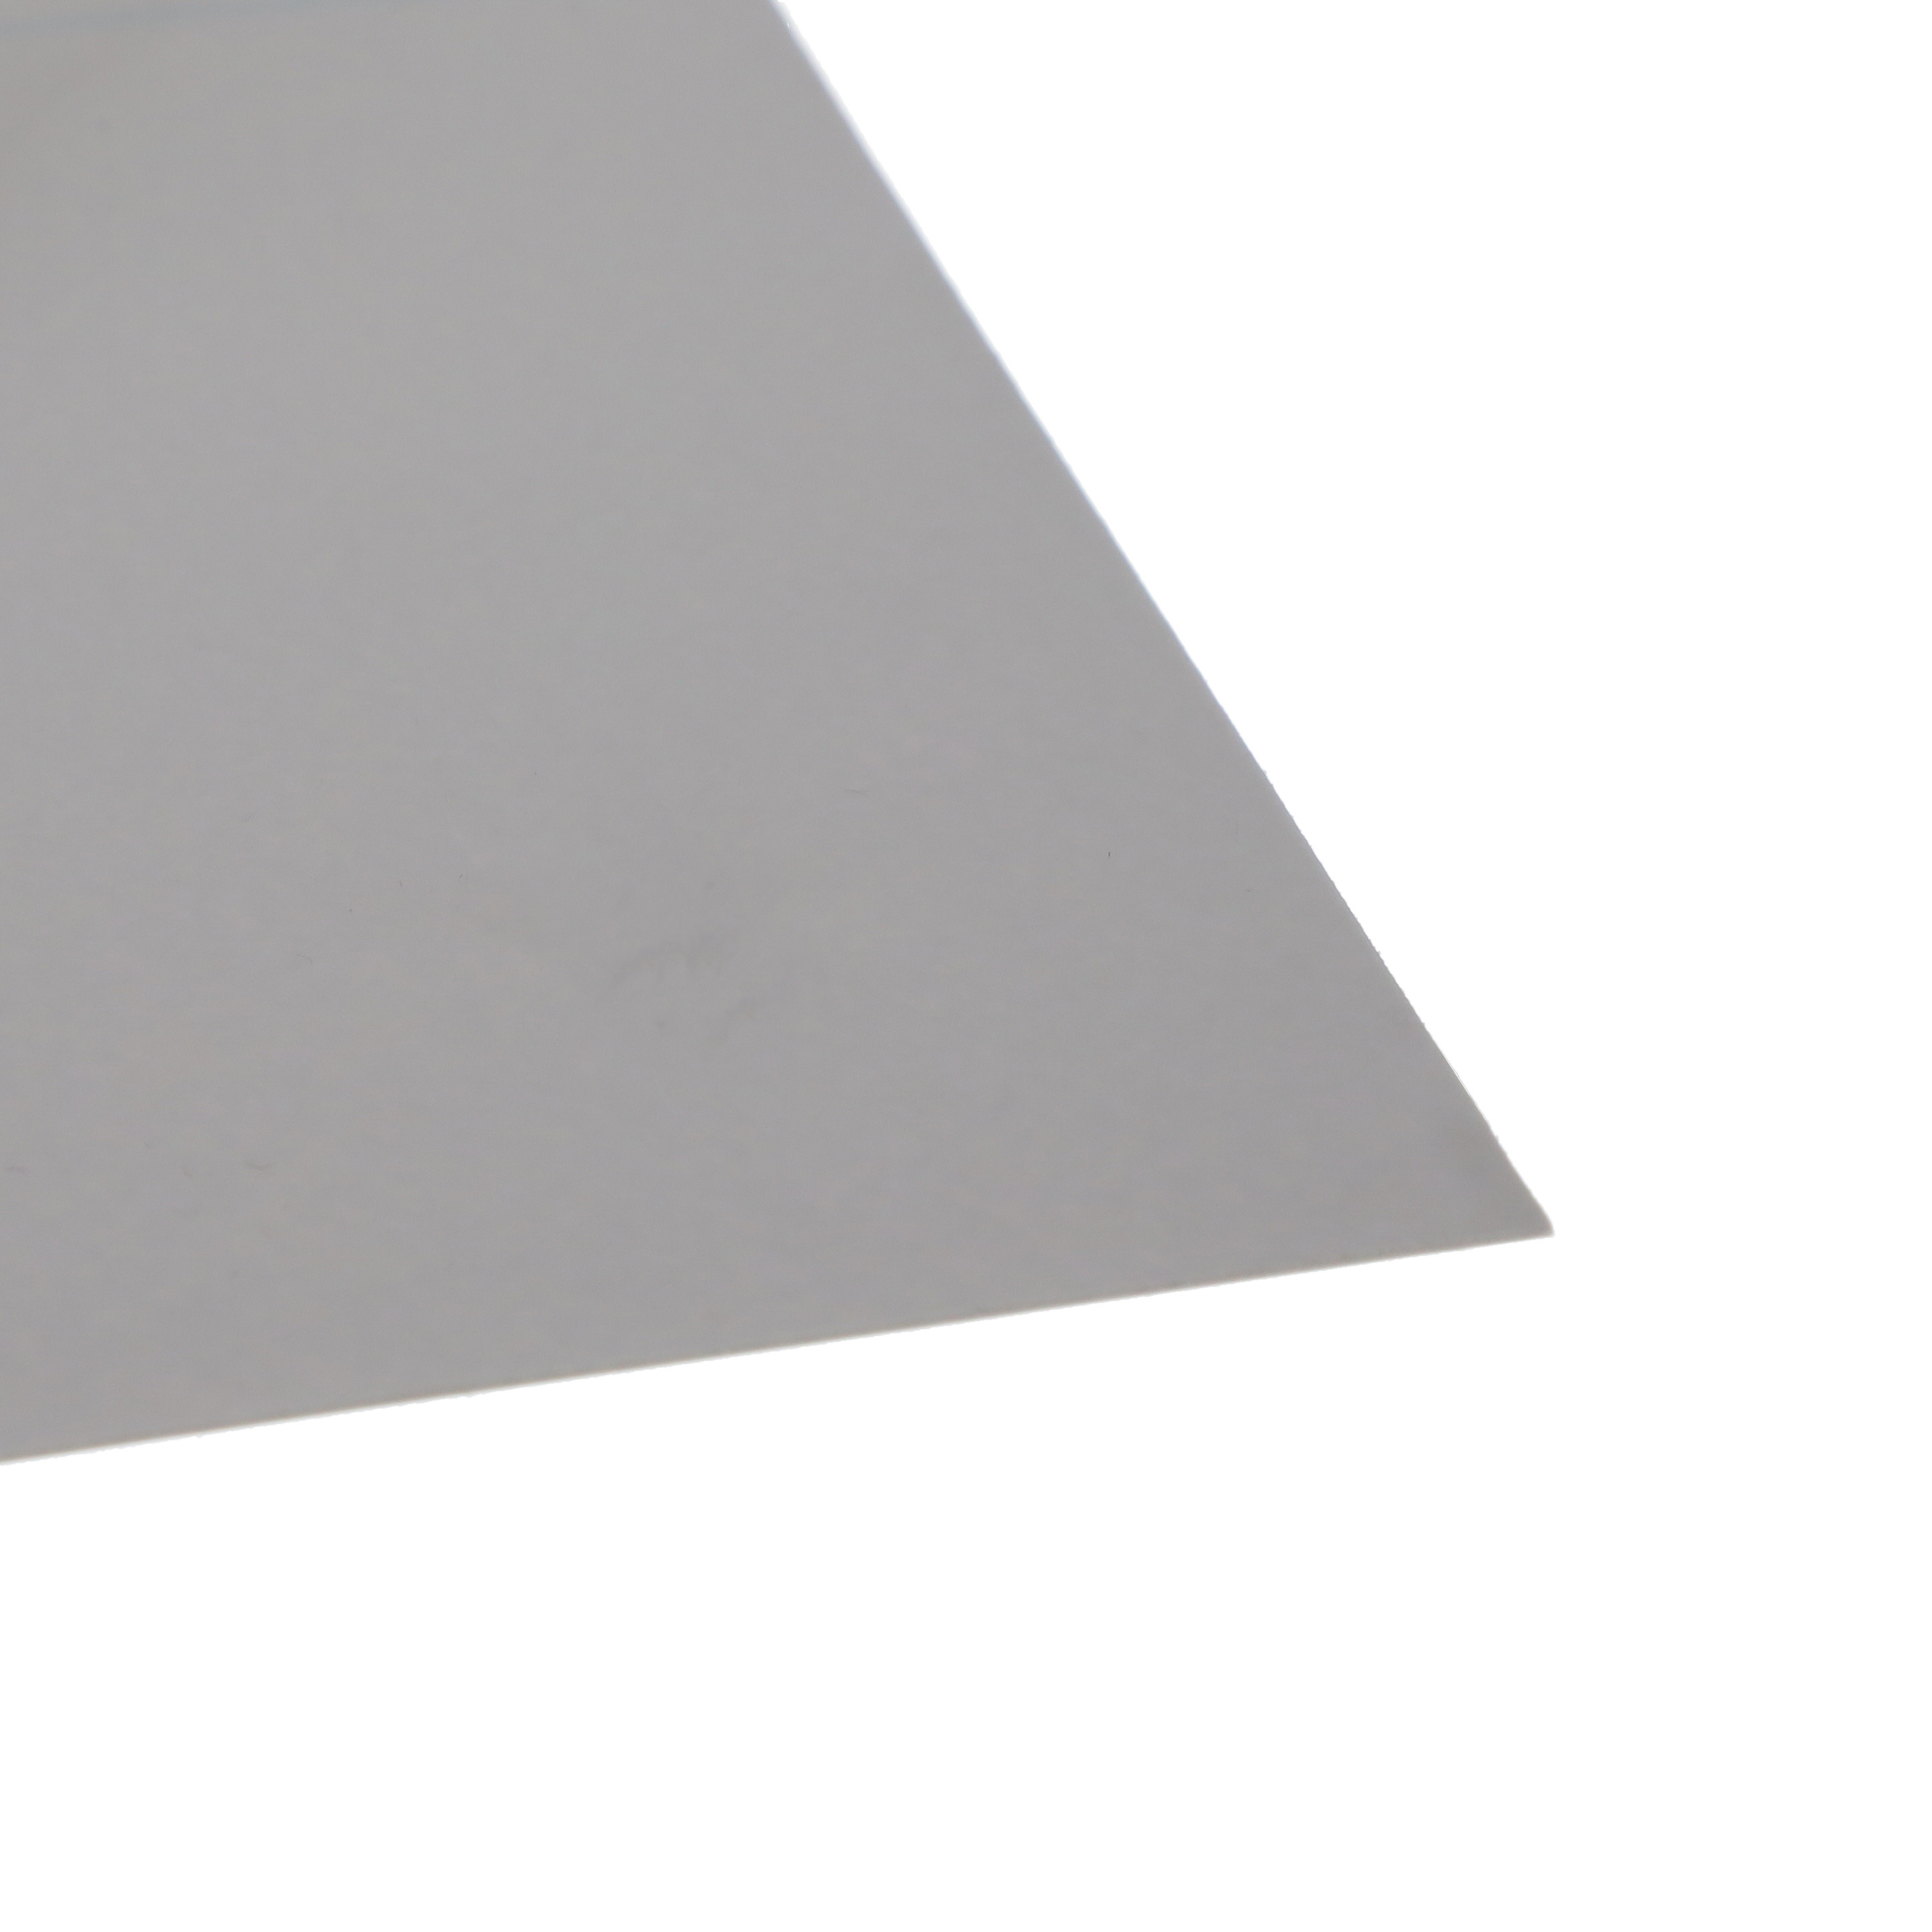 【COH-1706-410-30-1NT】THERM PAD 410X410MM GRAY